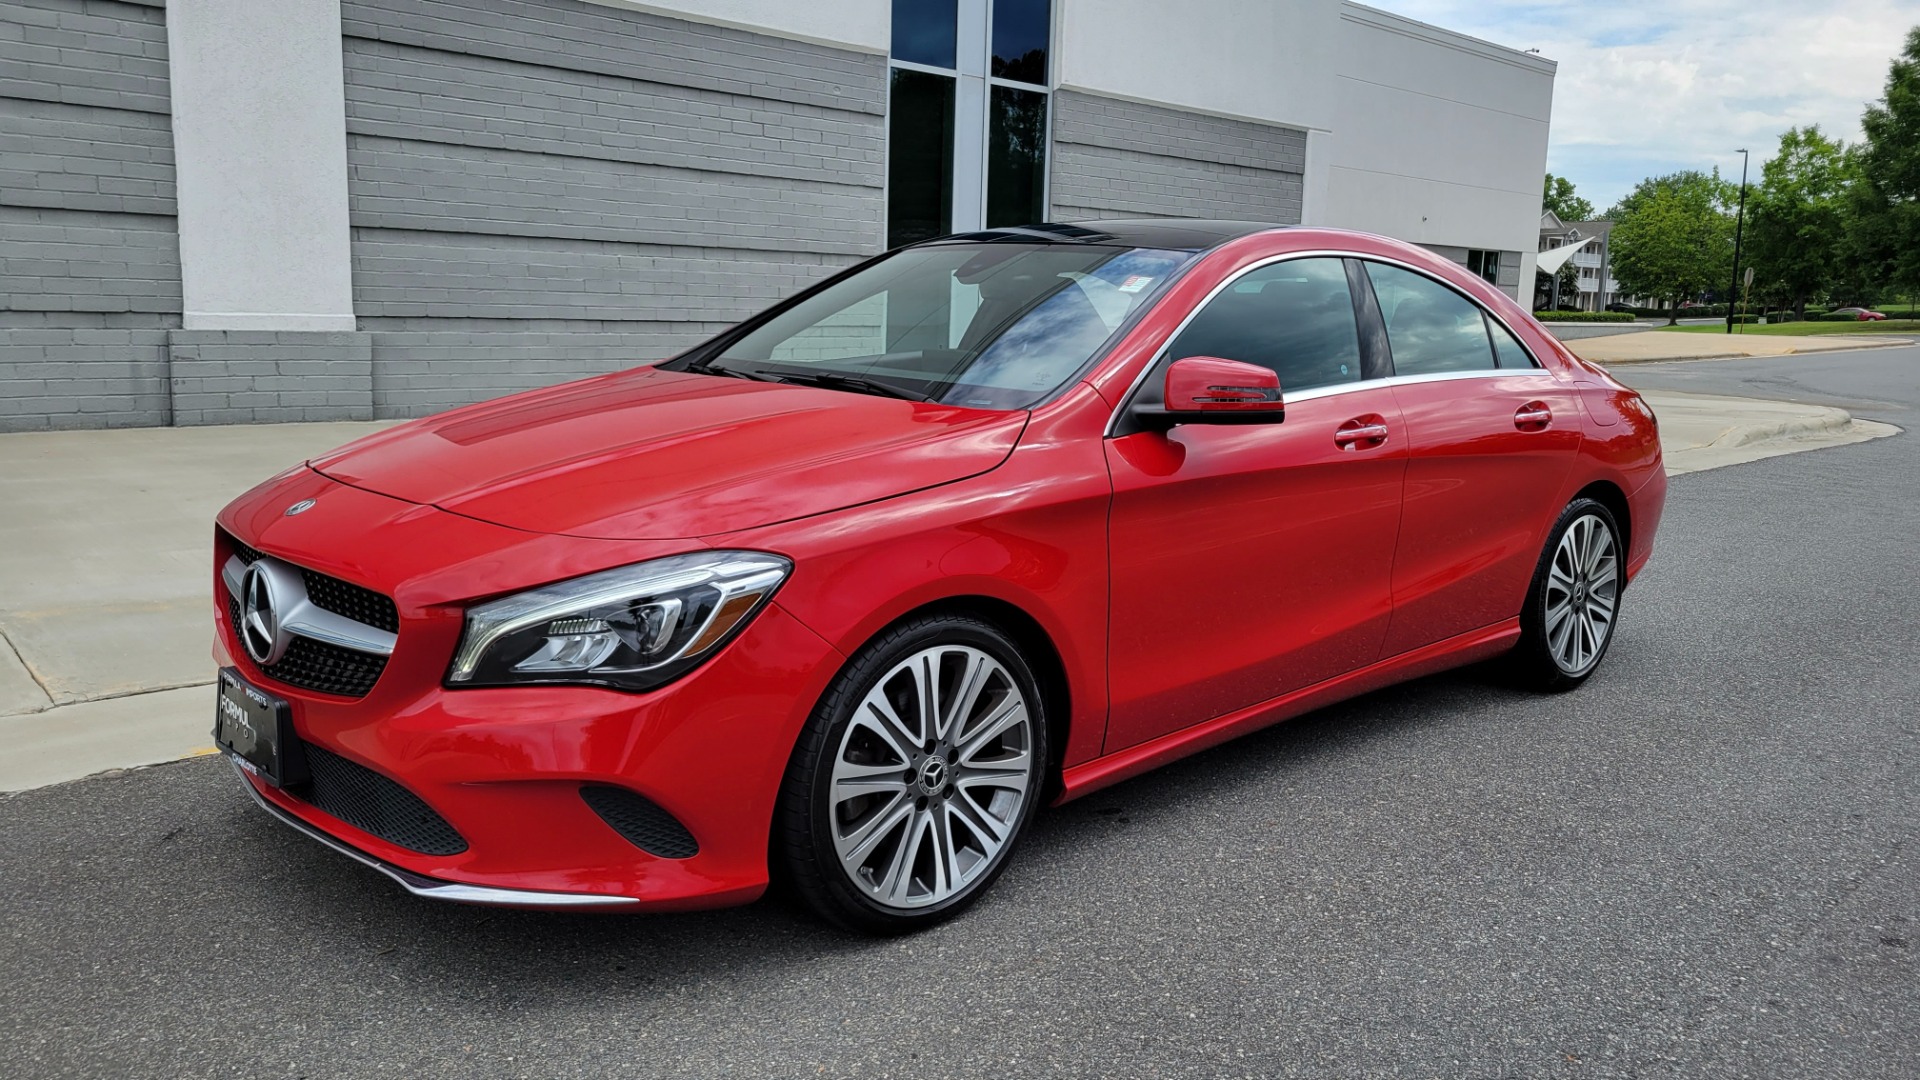 Used 2019 Mercedes-Benz CLA 250 PREMIUM / CONV PKG / PANO-ROOF / H/K SND / CAMERA for sale $31,995 at Formula Imports in Charlotte NC 28227 3